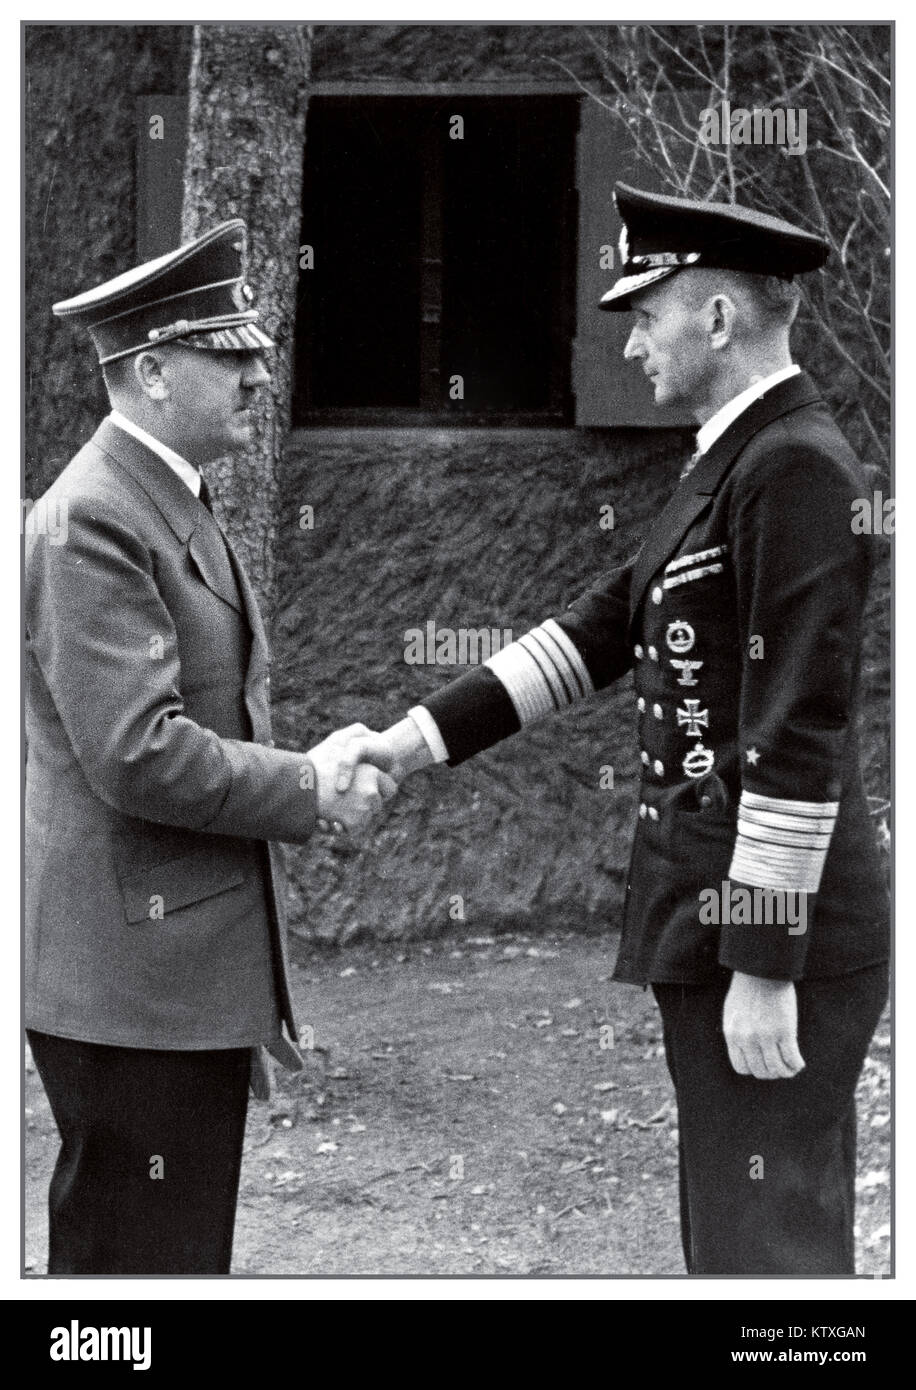 HITLER DOENITZ WW2 1940's Adolph Hitler shaking hands with Admiral Karl Donitz, Hitler’s successor as Reichspräsident and Supreme Commander of the German Armed Forces. Arrested and subsequently jailed for war crimes by allied forces after his surrender, Dönitz was released on 01-10-1956, and lived out the rest of his life in relative obscurity in Aumühle, occasionally corresponding with collectors of German Naval history, and still to the end a fanatic Nazi, died of a heart attack on Christmas Eve 24-12-1980 as the last German officer with the rank of Grand Admiral Stock Photo